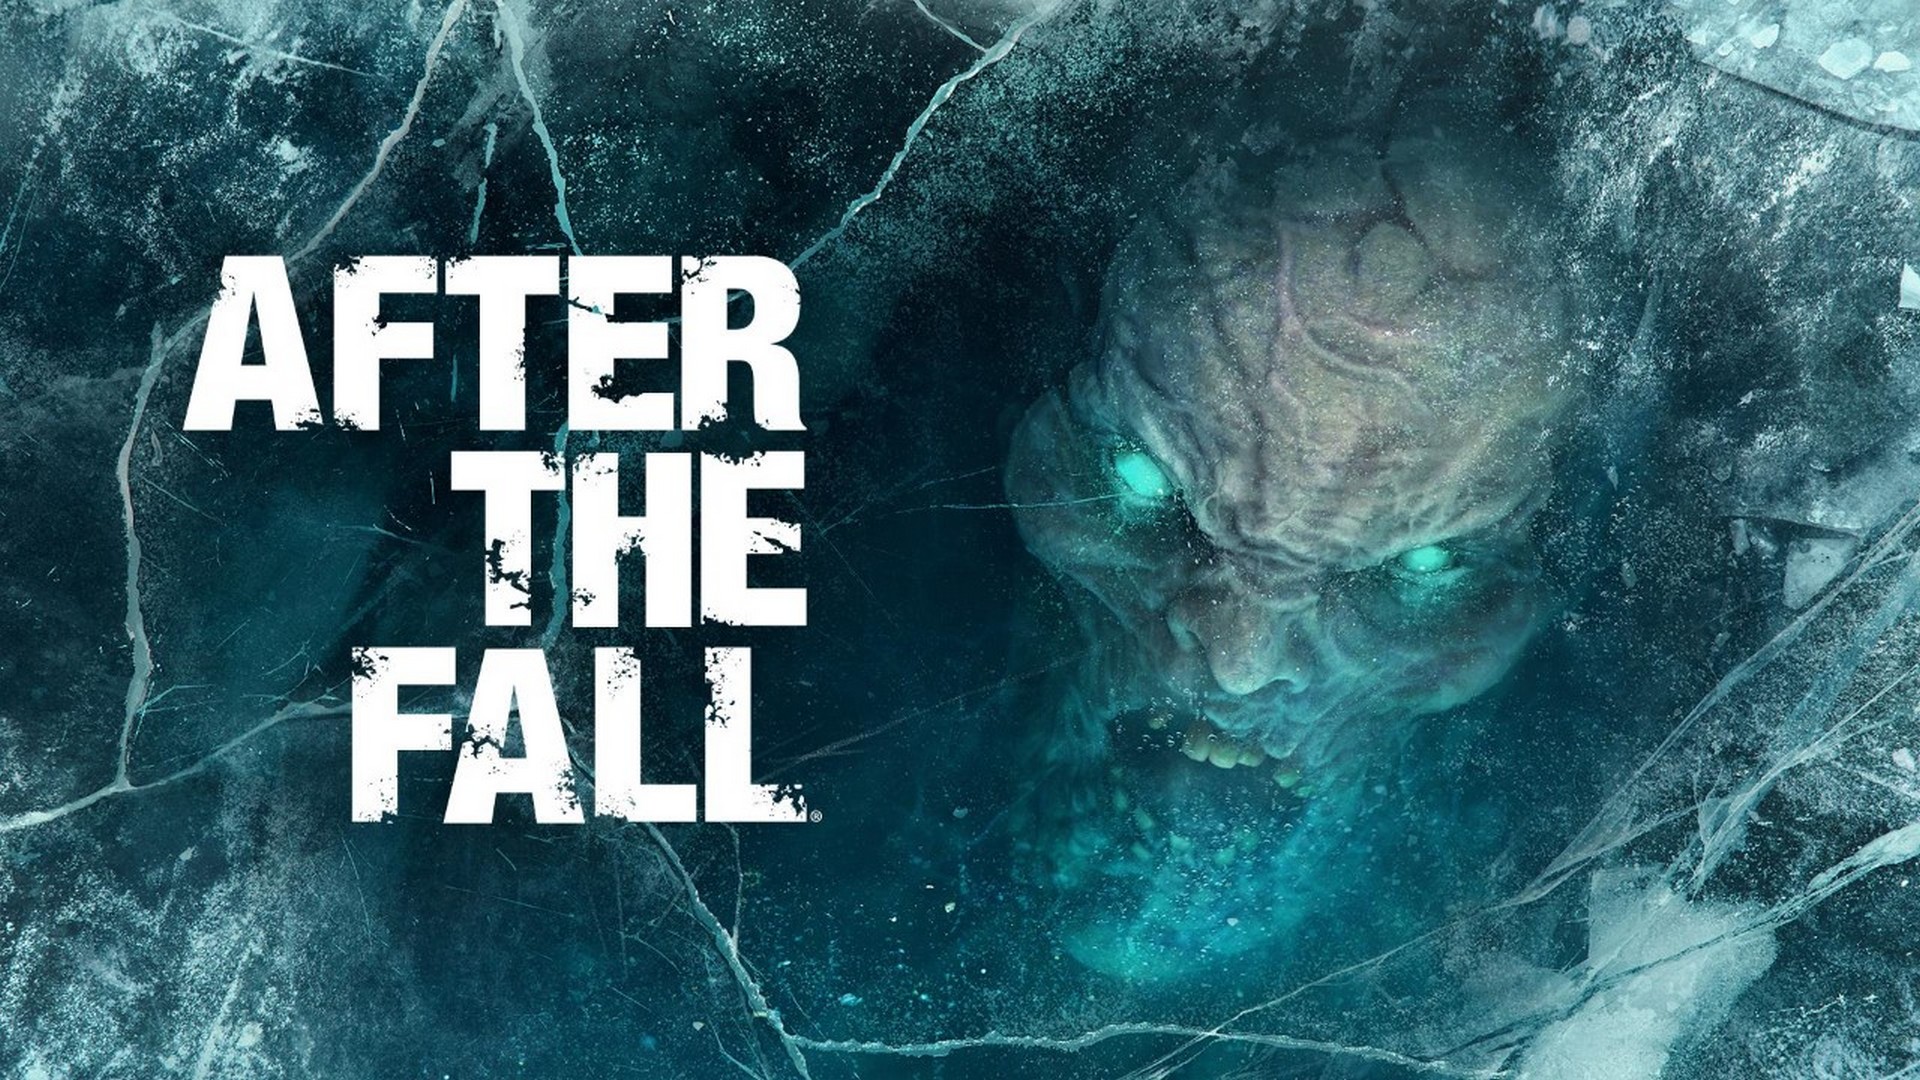 The after the Fall диск ps4. After the Fall - frontrunner Edition. After the Fall (credit: Vertigo games).